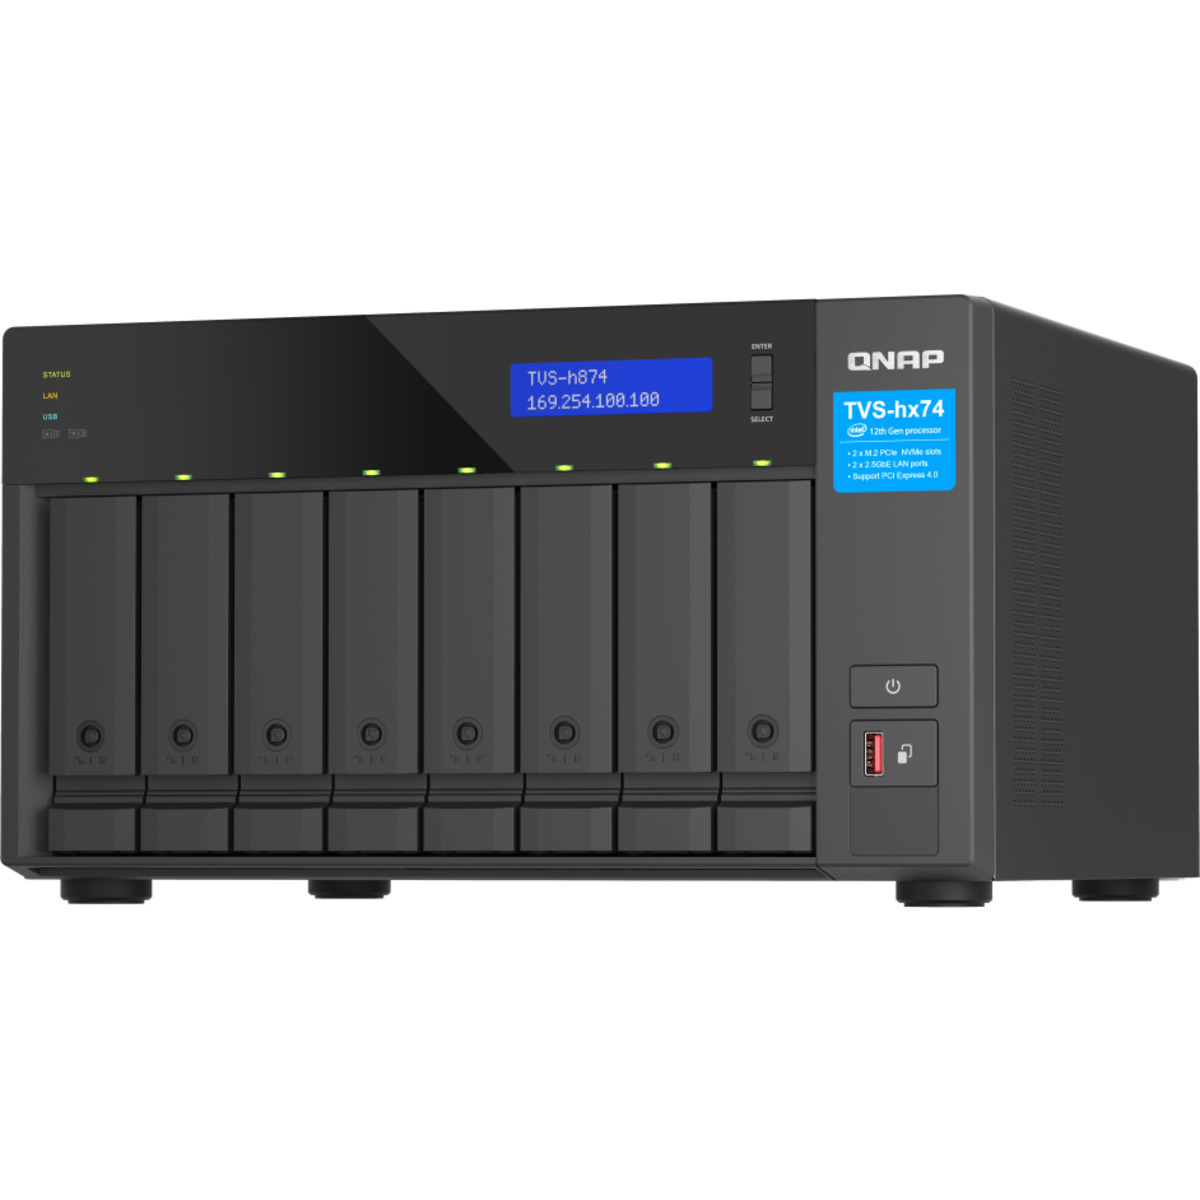 buy QNAP TVS-h874 Core i7 32tb Desktop NAS - Network Attached Storage Device 8x4000gb Samsung 870 EVO MZ-77E4T0BAM 2.5 560/530MB/s SATA 6Gb/s SSD CONSUMER Class Drives Installed - Burn-In Tested - nas headquarters buy network attached storage server device das new raid-5 free shipping simply usa TVS-h874 Core i7